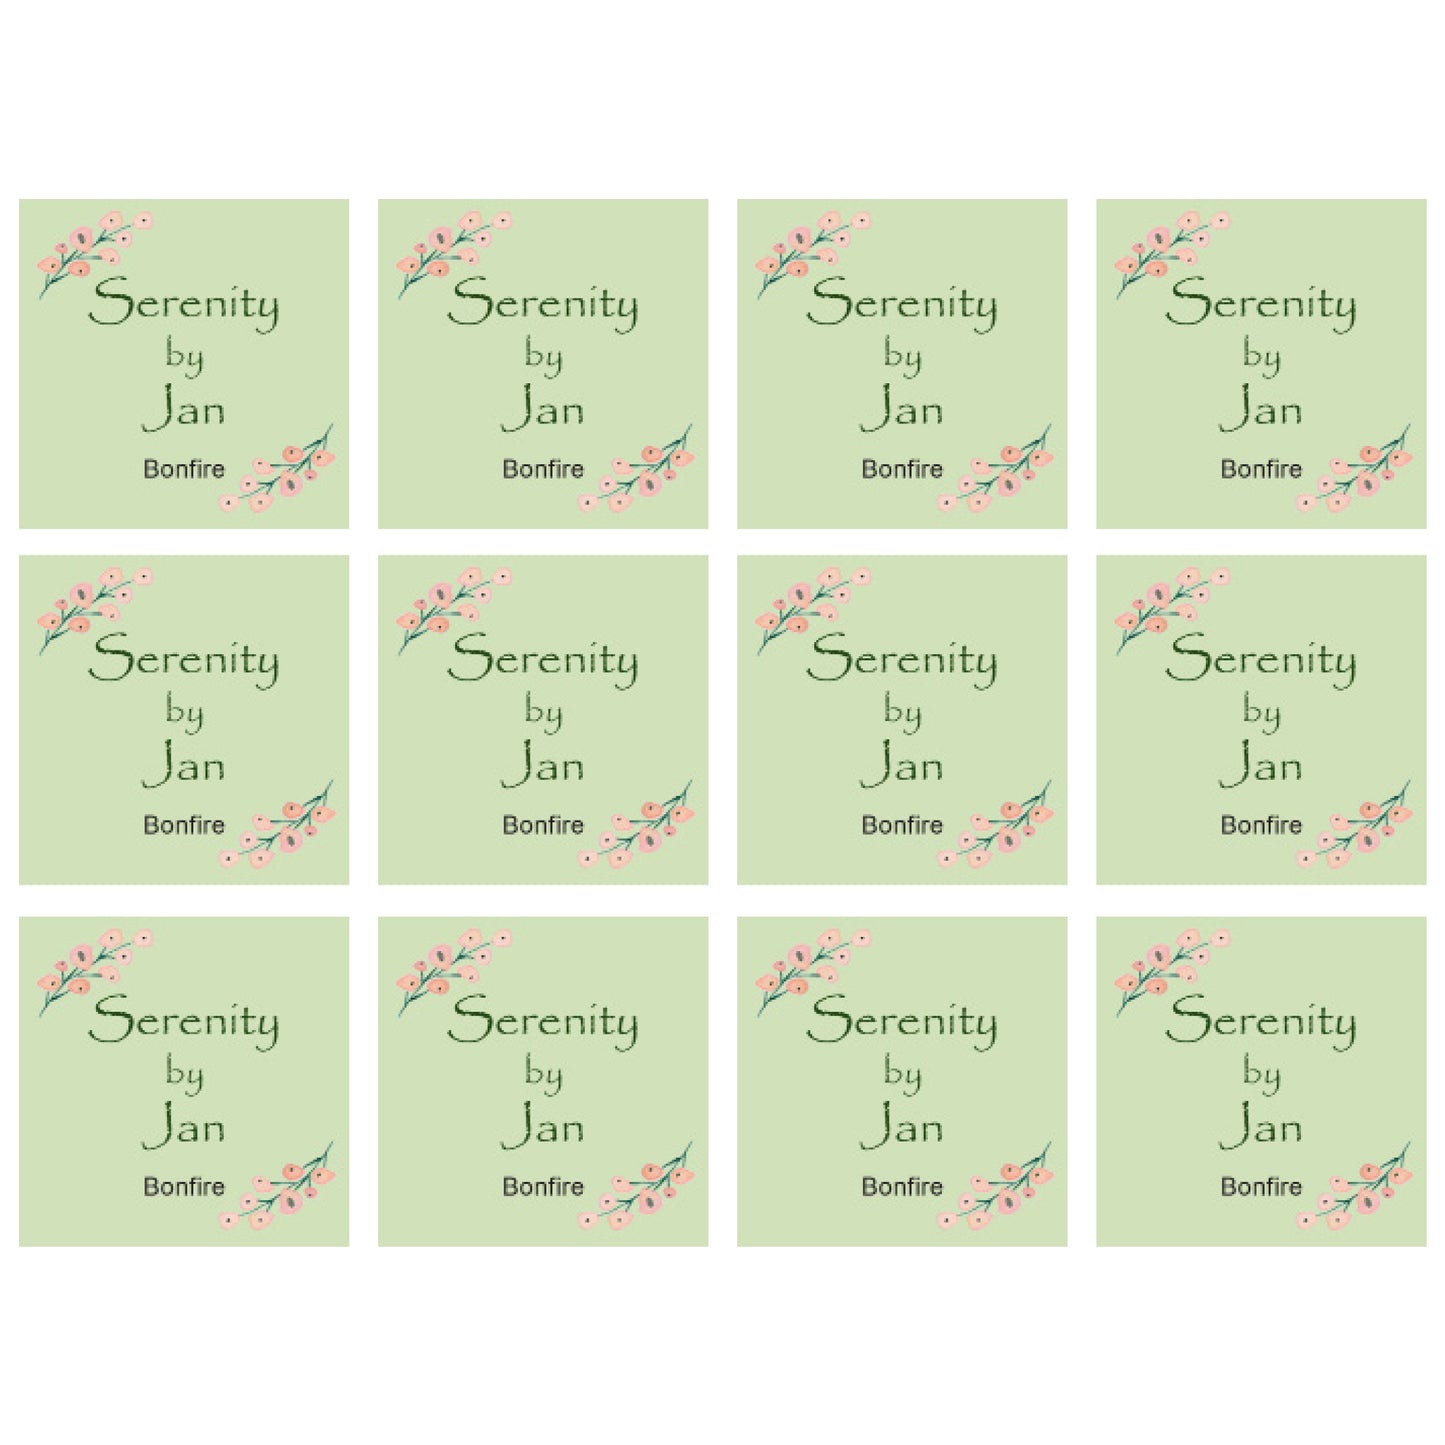 Office Bridal Shower Serenity by Jan Printables